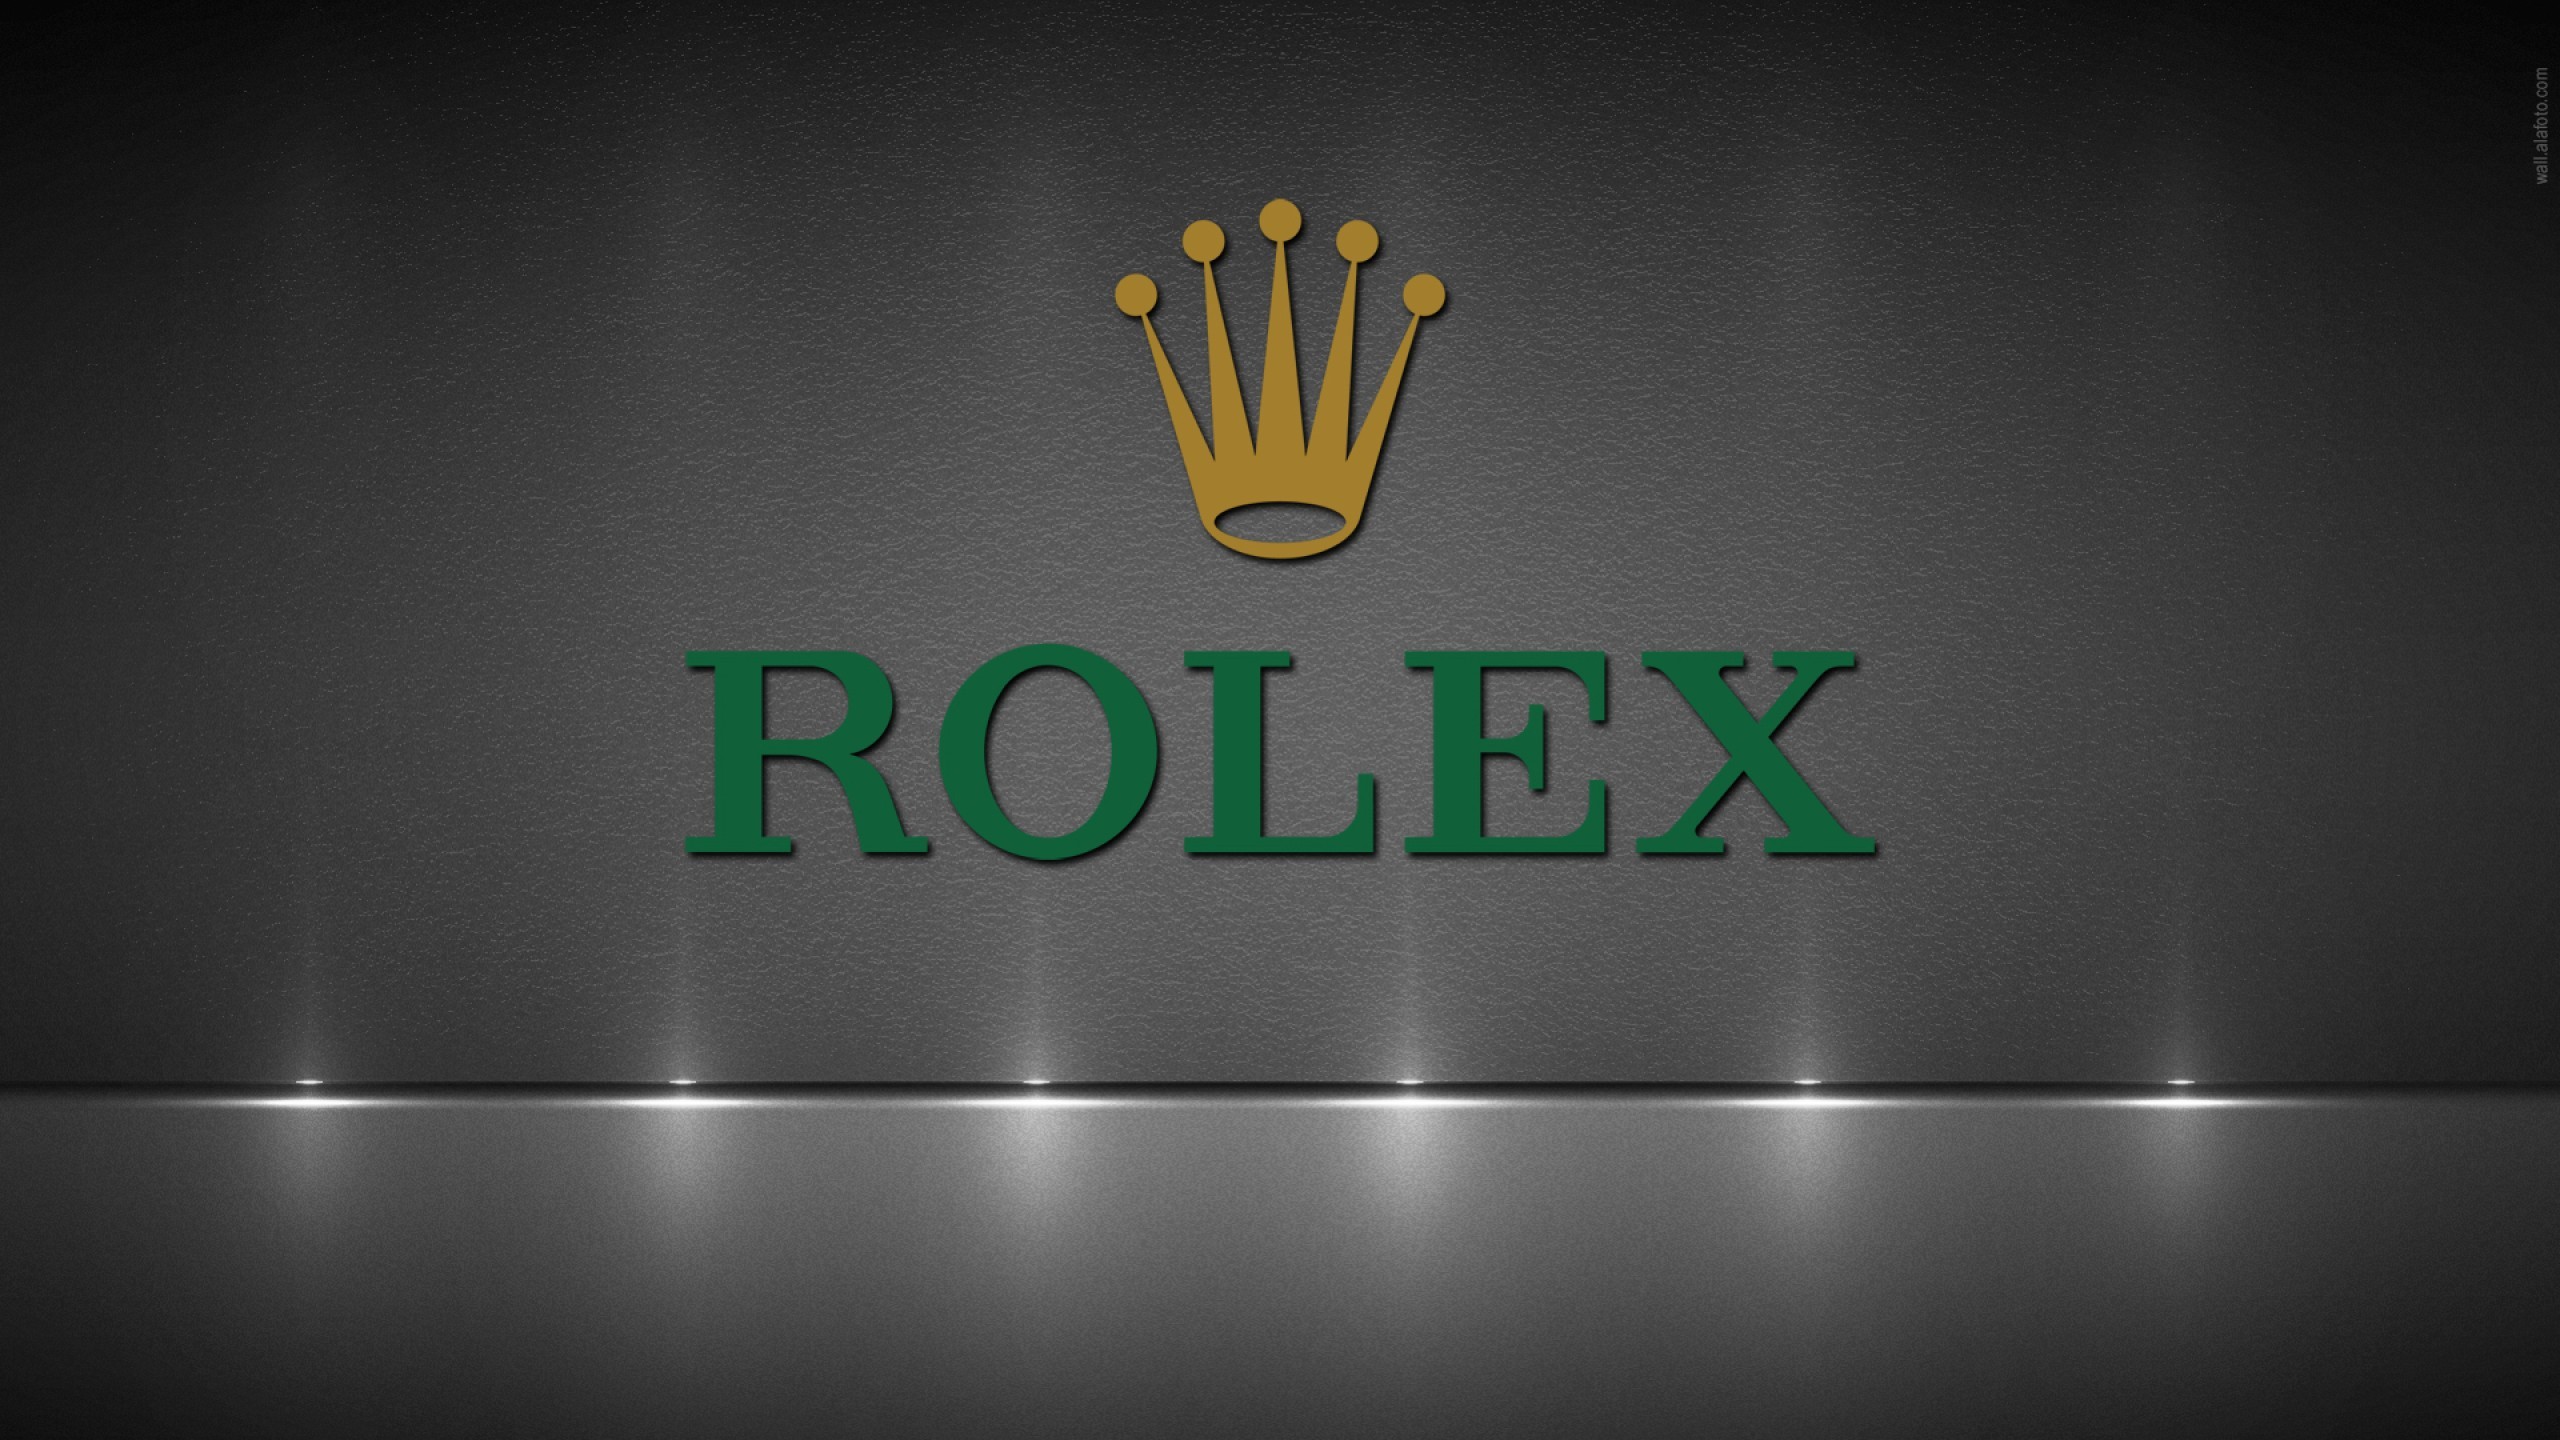 2560x1440 ... Quality Rolex Wallpaper | G.sFDcY Wallpapers HQFX ...